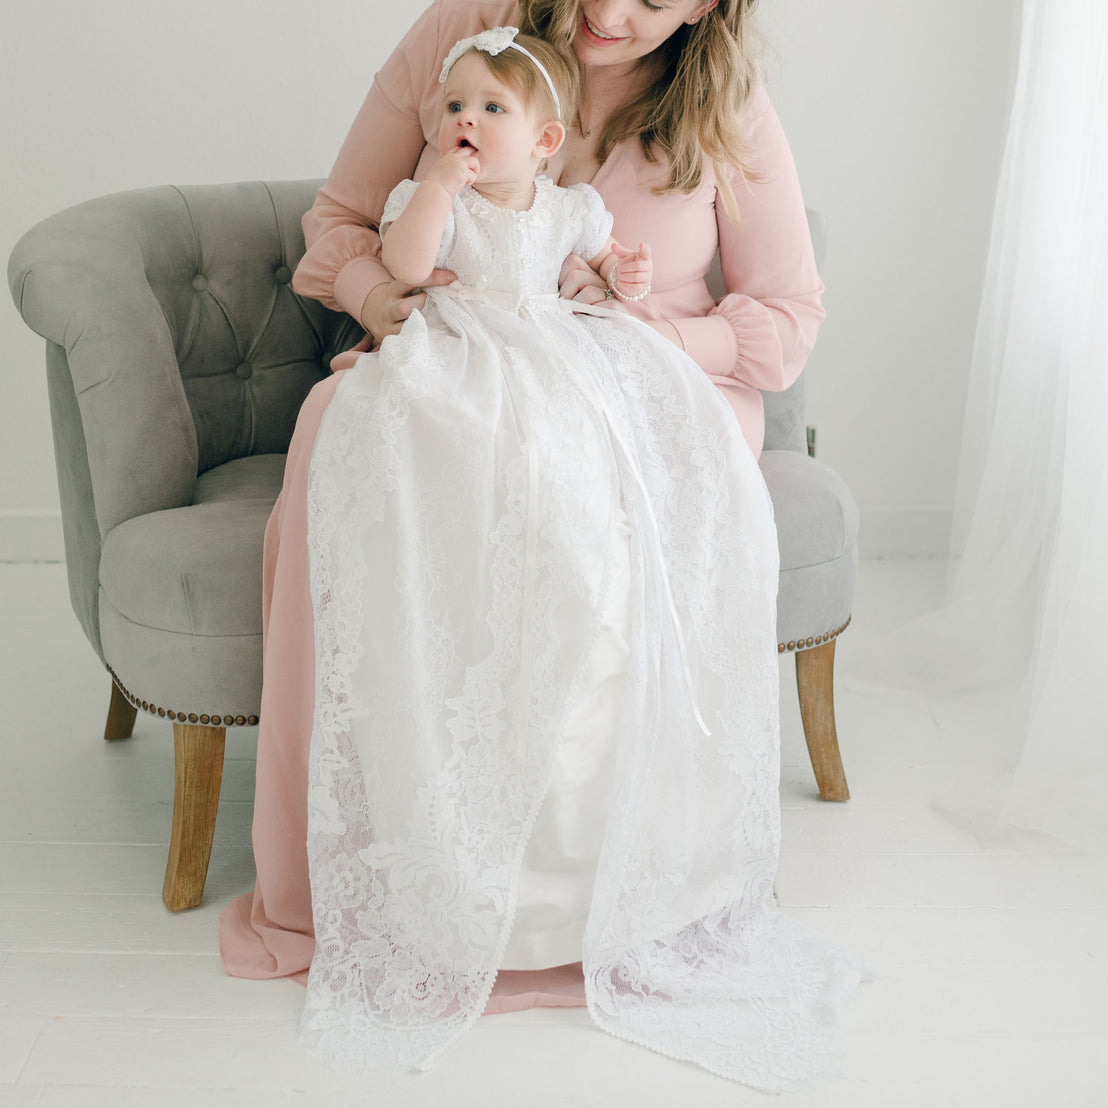 A mother in a pink dress sits in a gray sofa holding her baby girl, who is dressed in an Aria Christening Gown & Bonnet, in a bright, softly lit room.